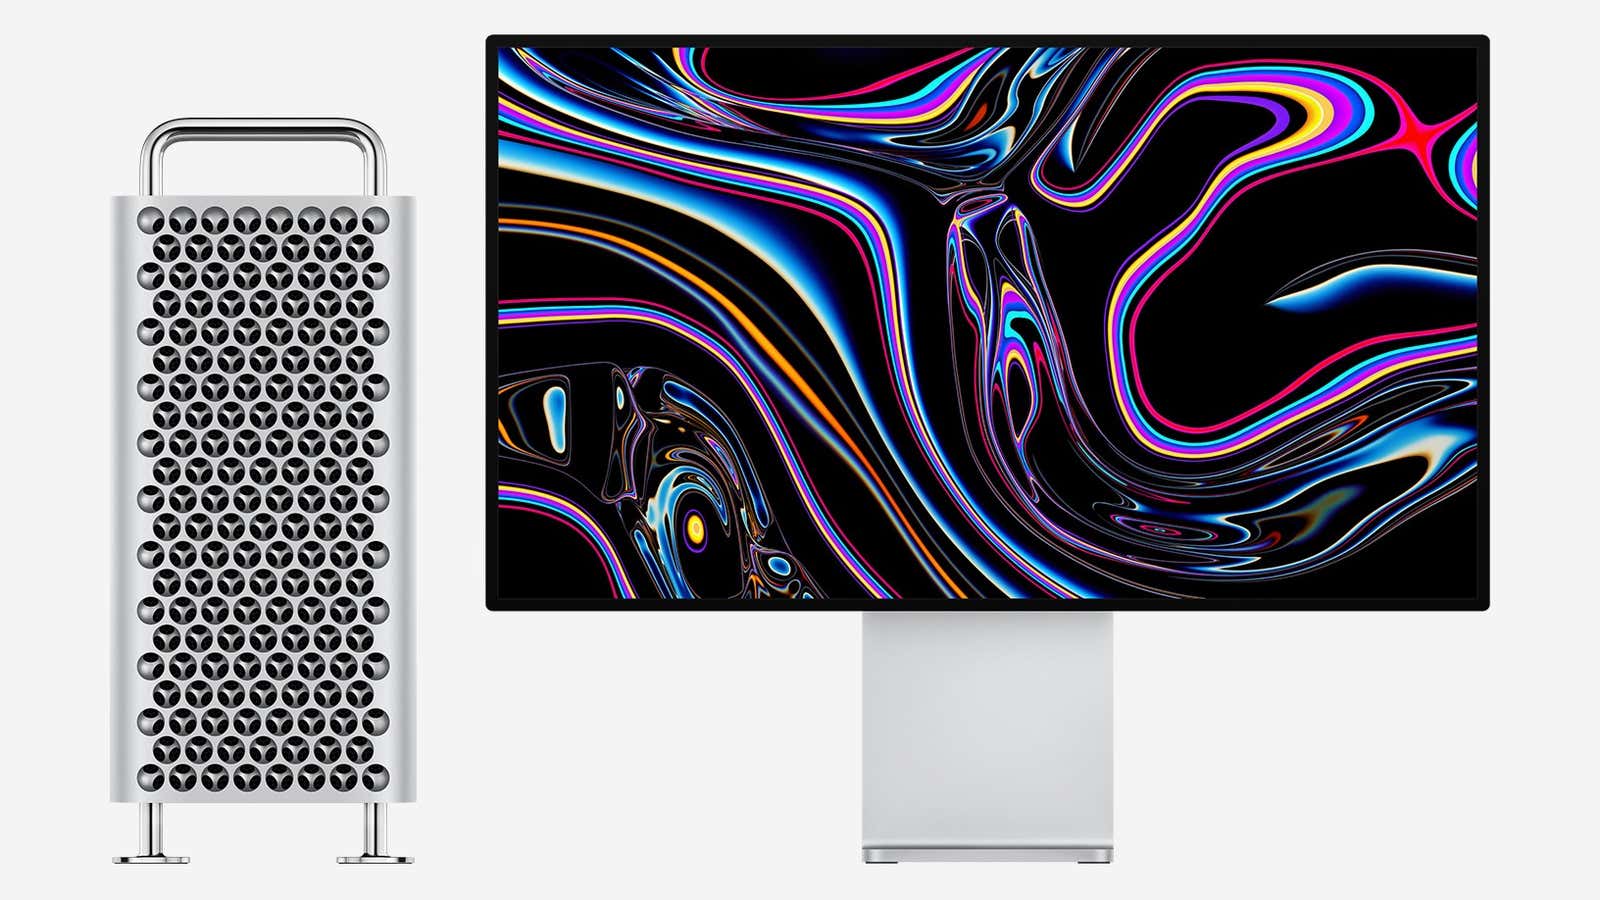 The new Mac Pro and Pro Display were just a few of the things announced today.